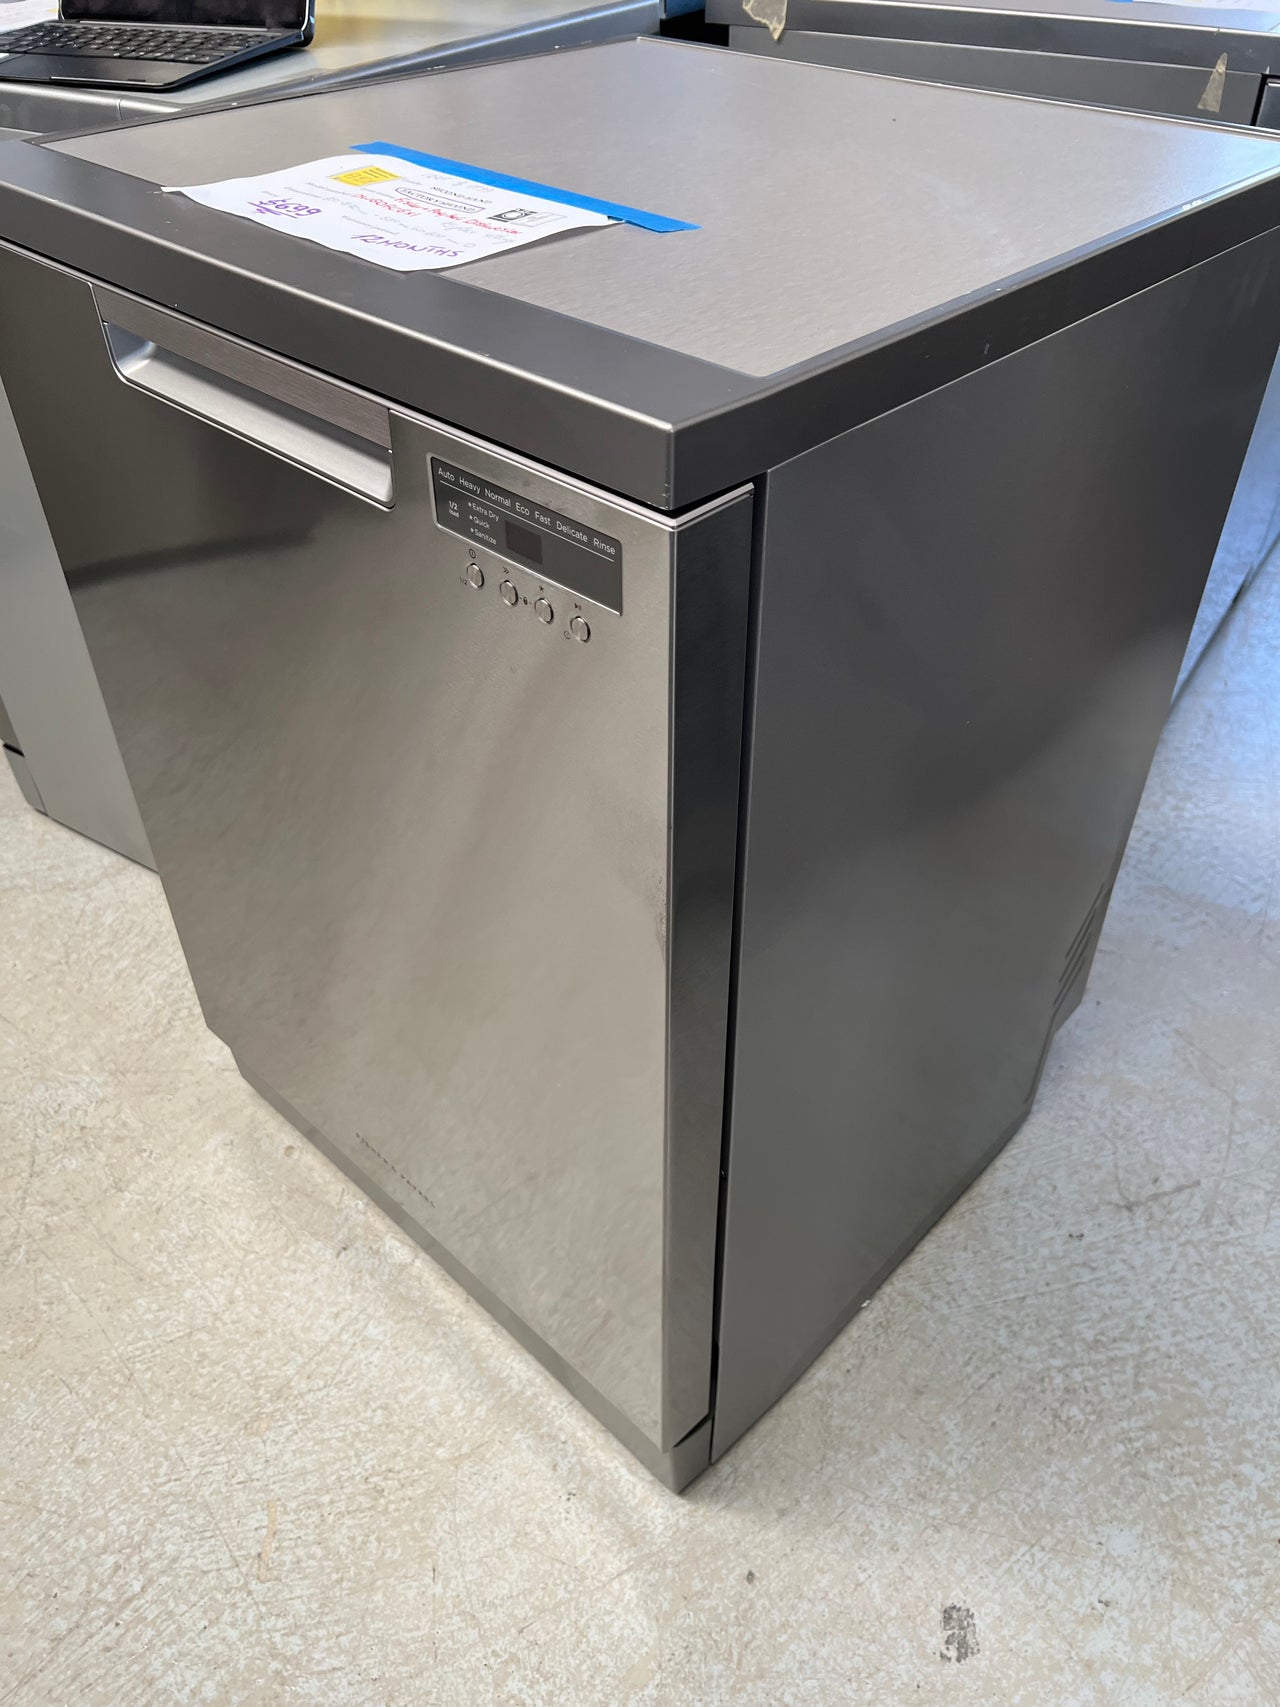 Factory second Fisher & Paykel 60cm Stainless Steel Dishwasher DW60FC6X1 - Second Hand Appliances Geebung